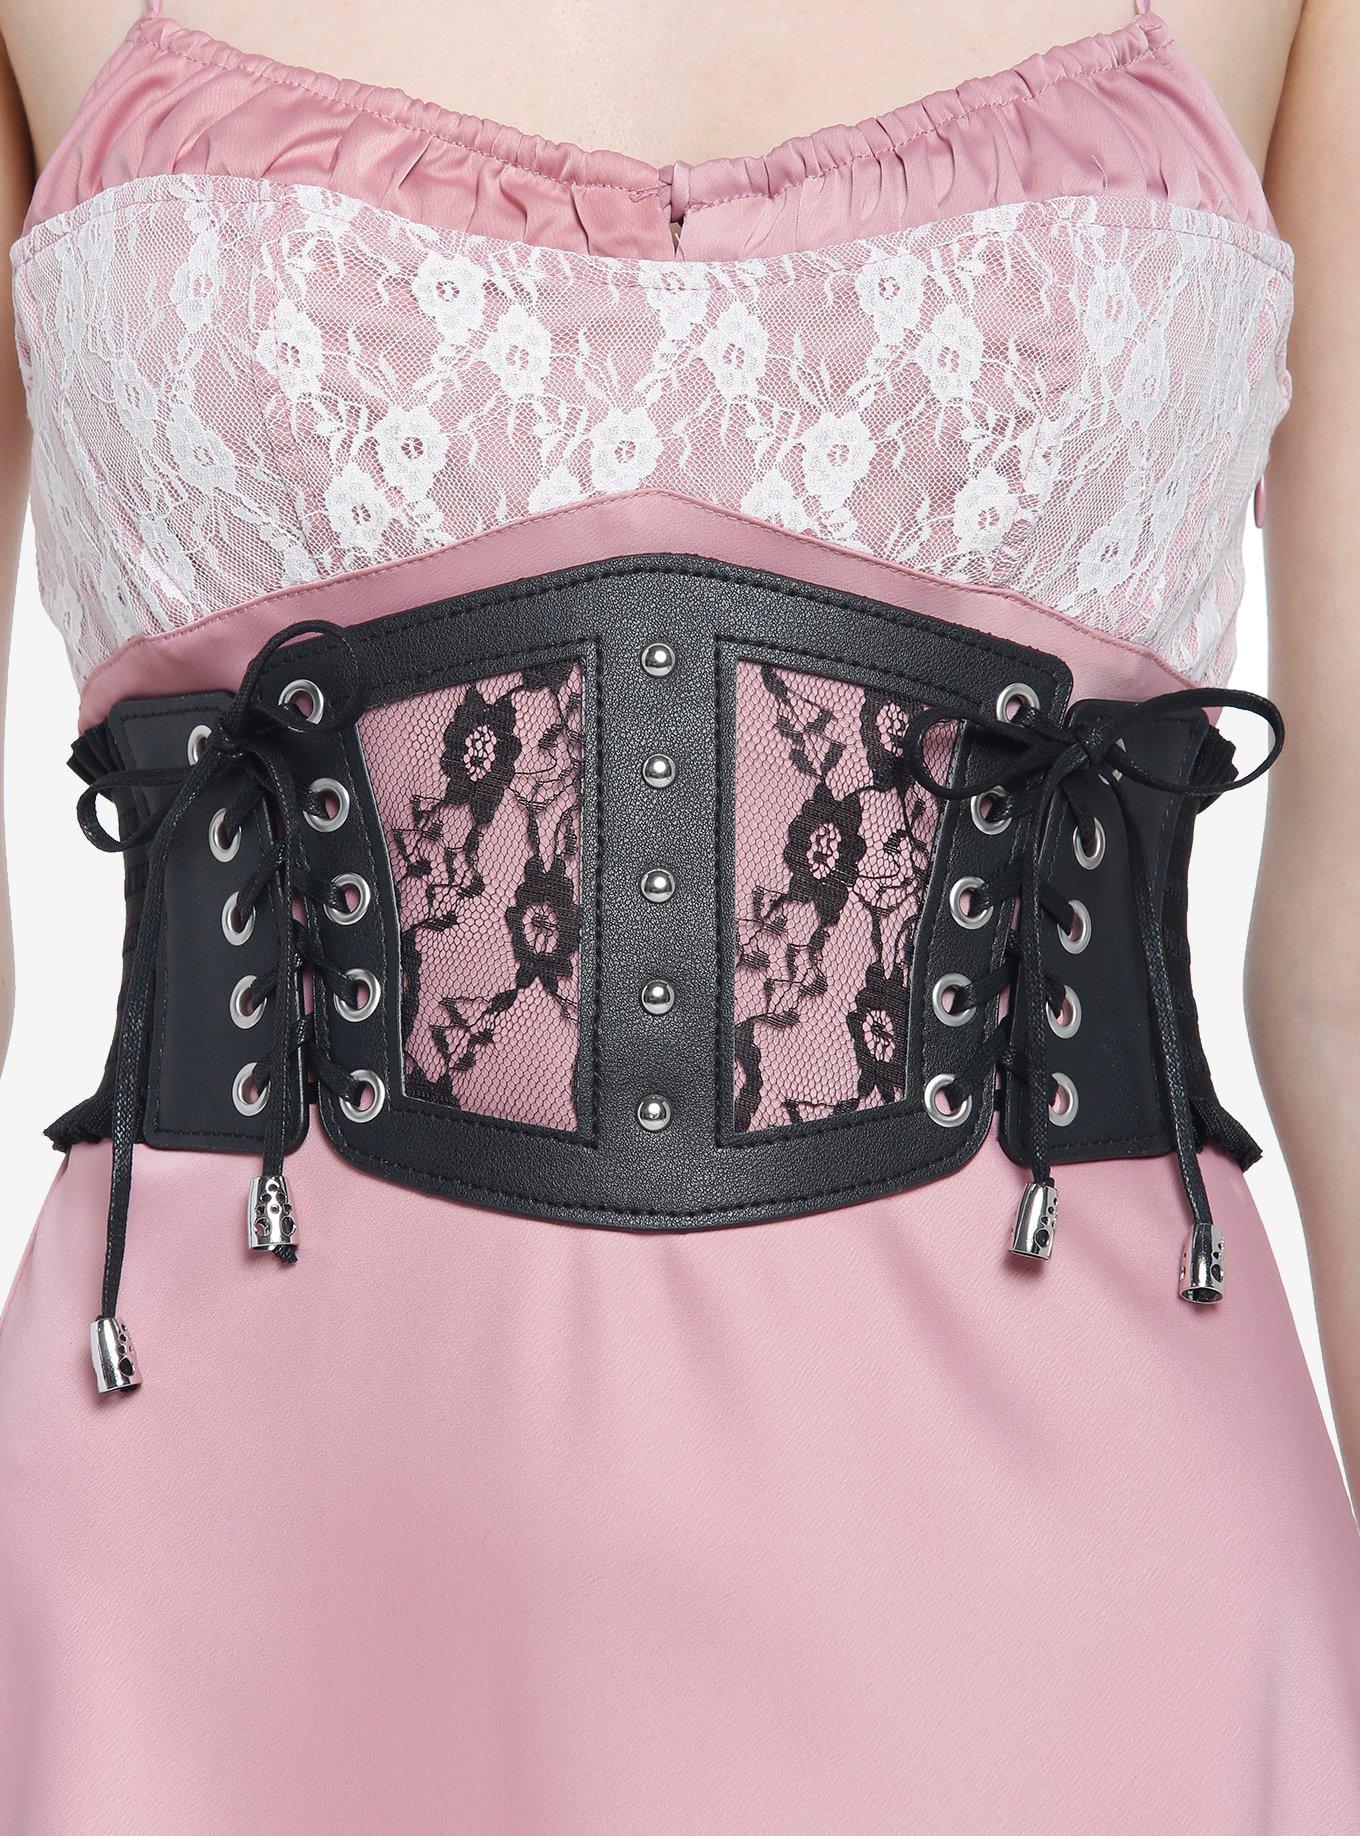 Black Floral Lace Lace Up Corset With Suspender And Thong